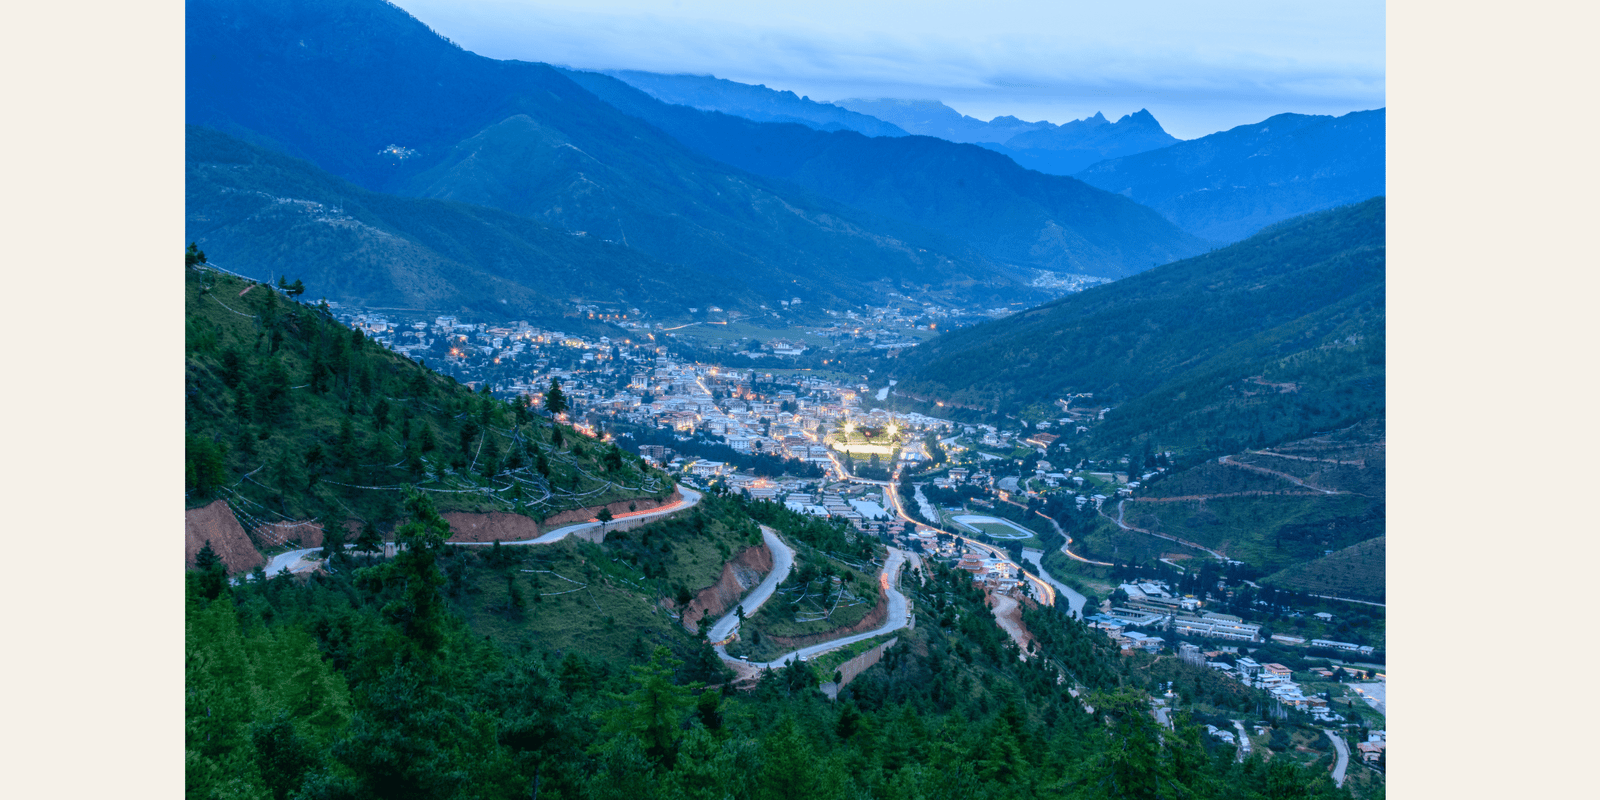 How to Reach Bhutan from India